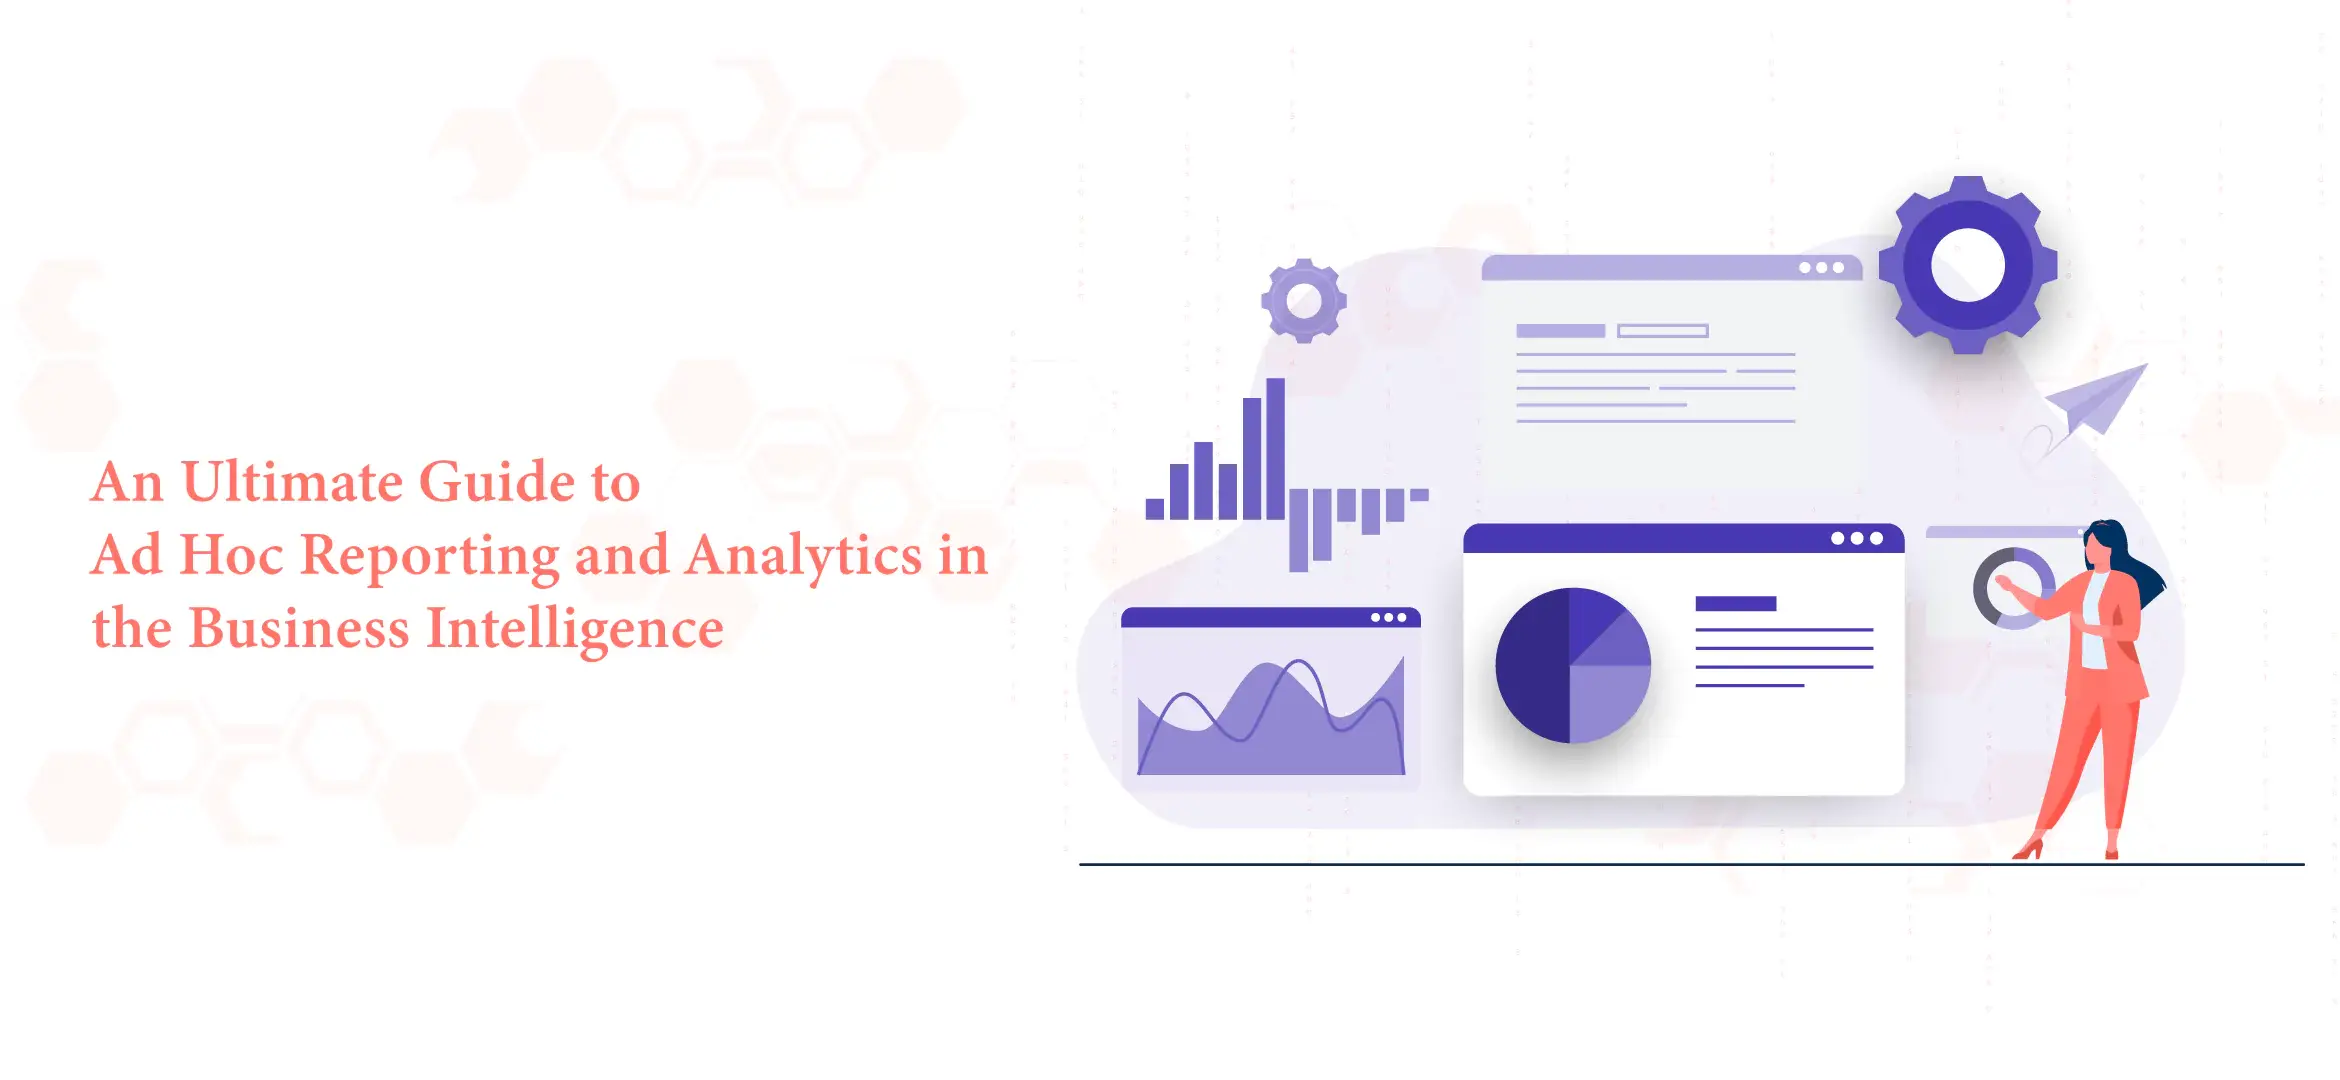 An Ultimate Guide to Ad Hoc Reporting & Analytics in the Business Intelligence